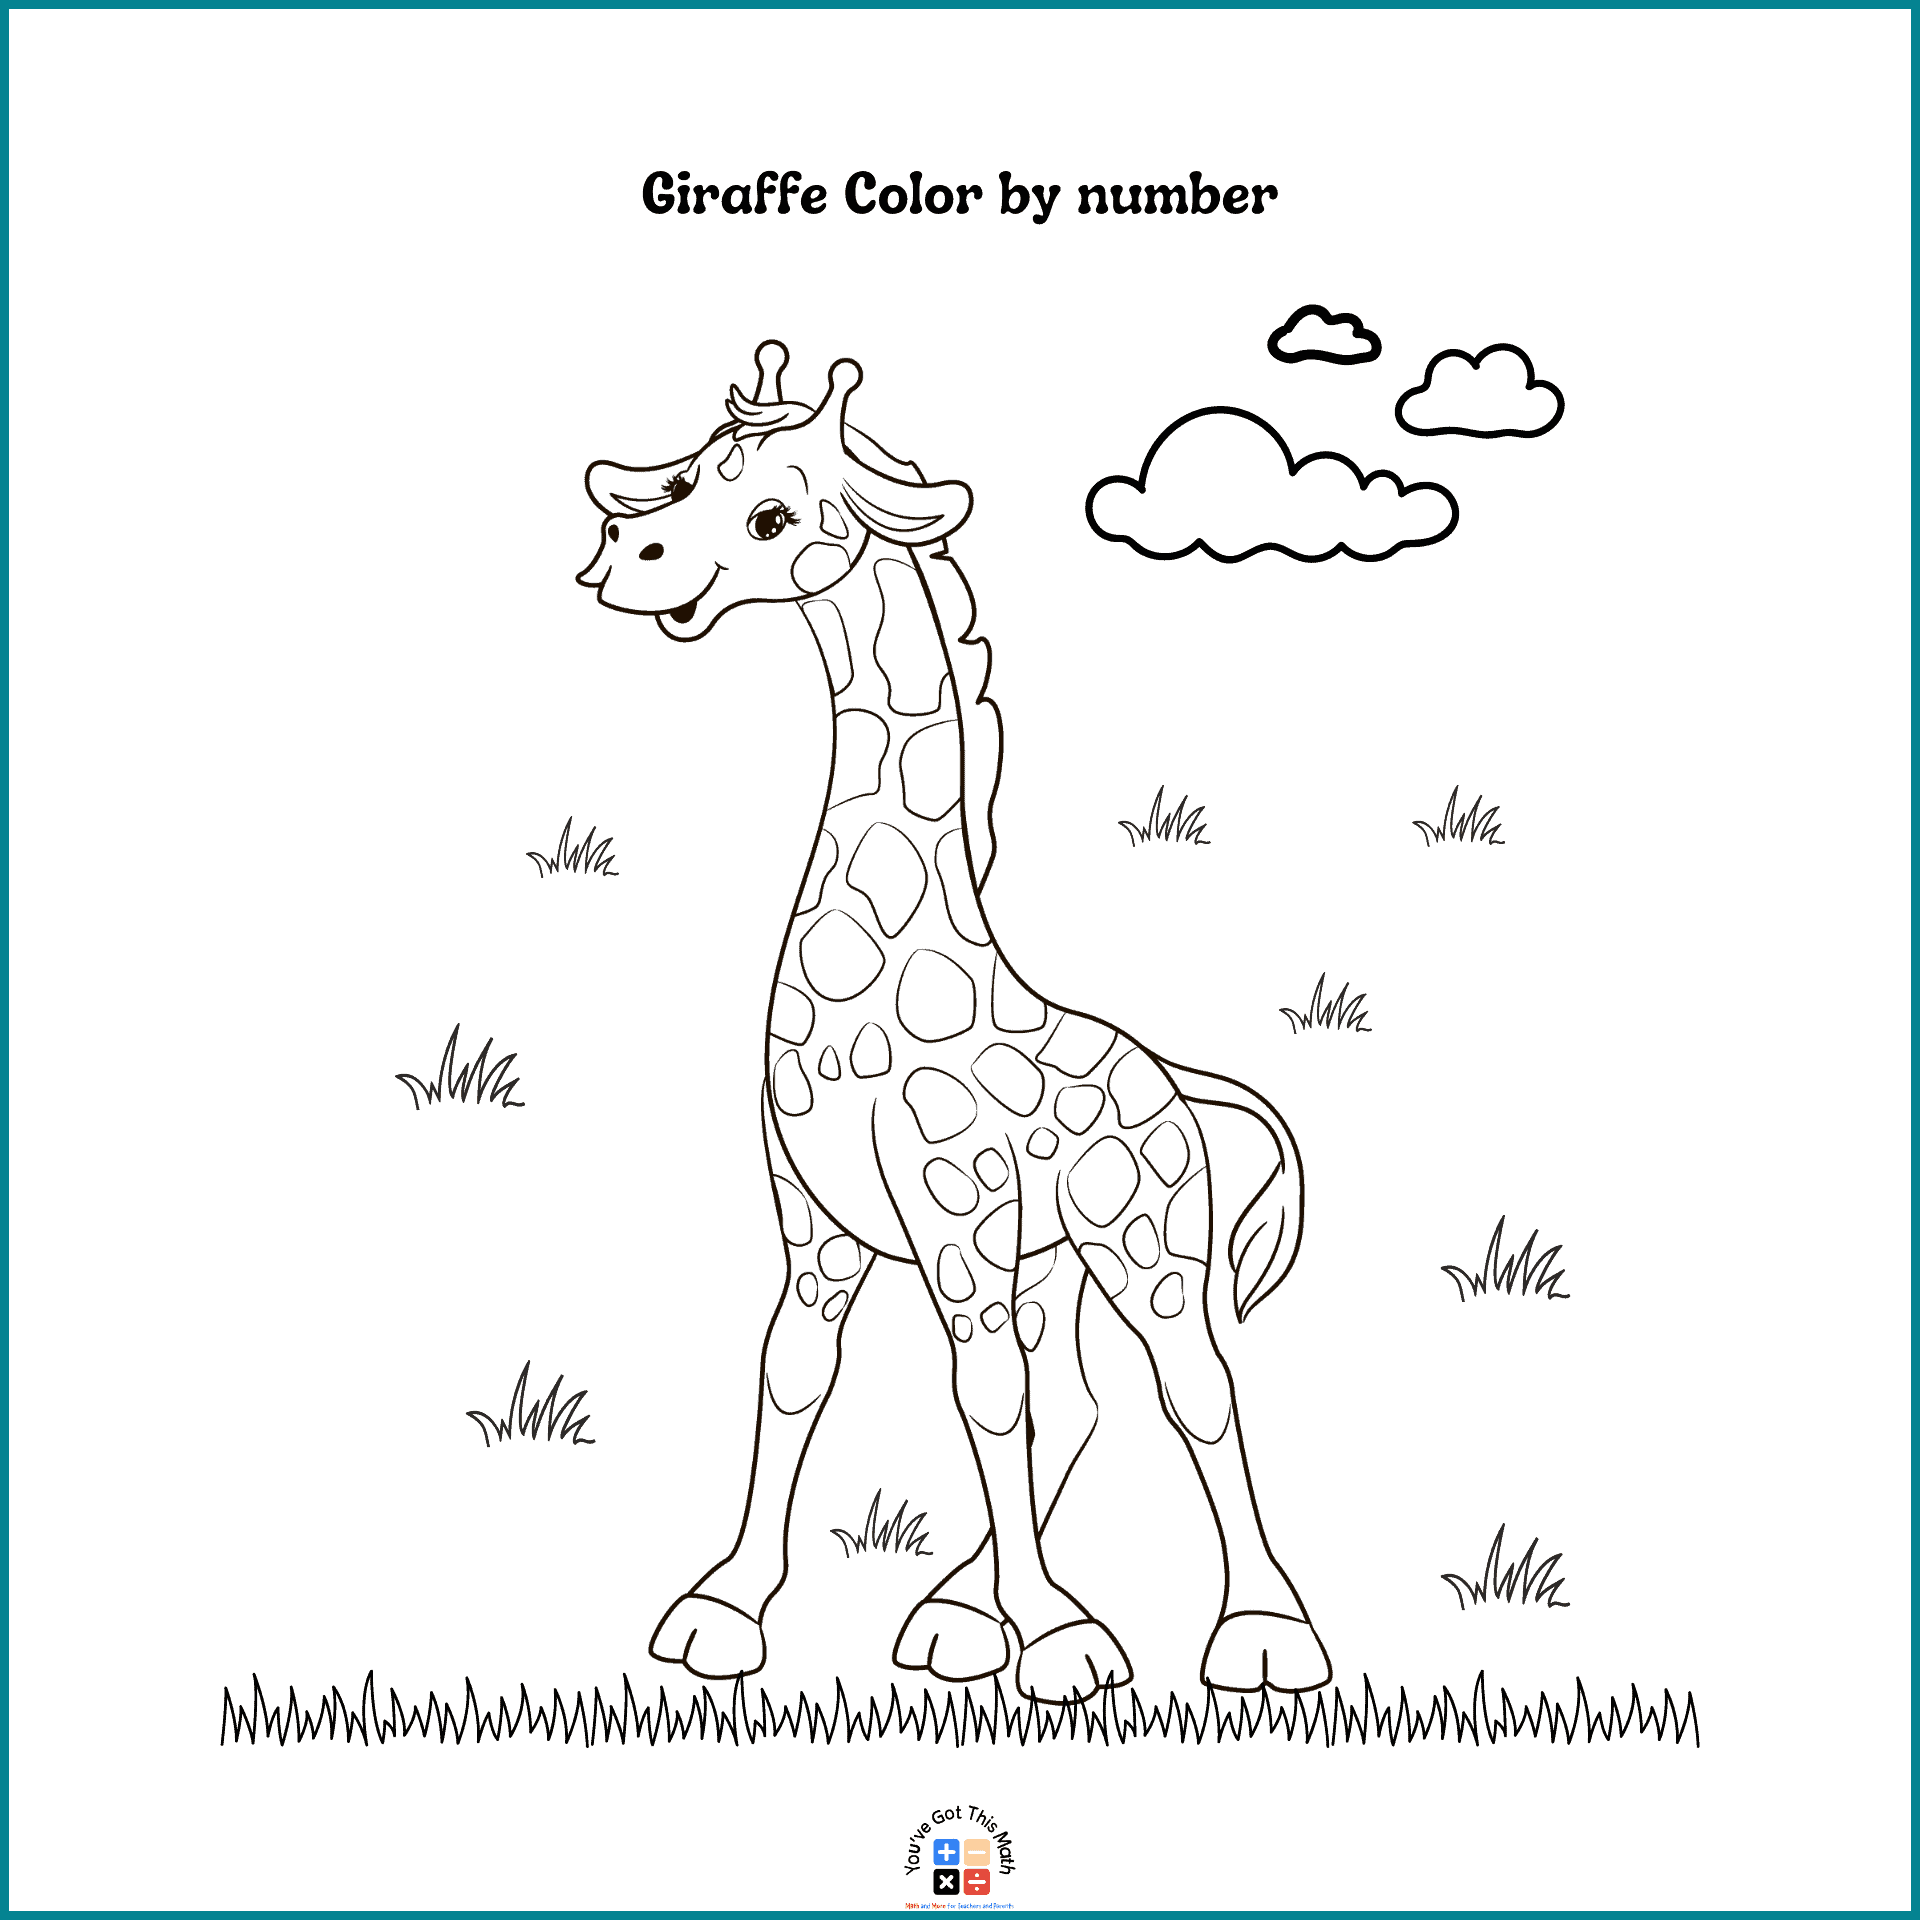 Grab Your Free Giraffe Color by Number Printable Worksheets | 20 Pages